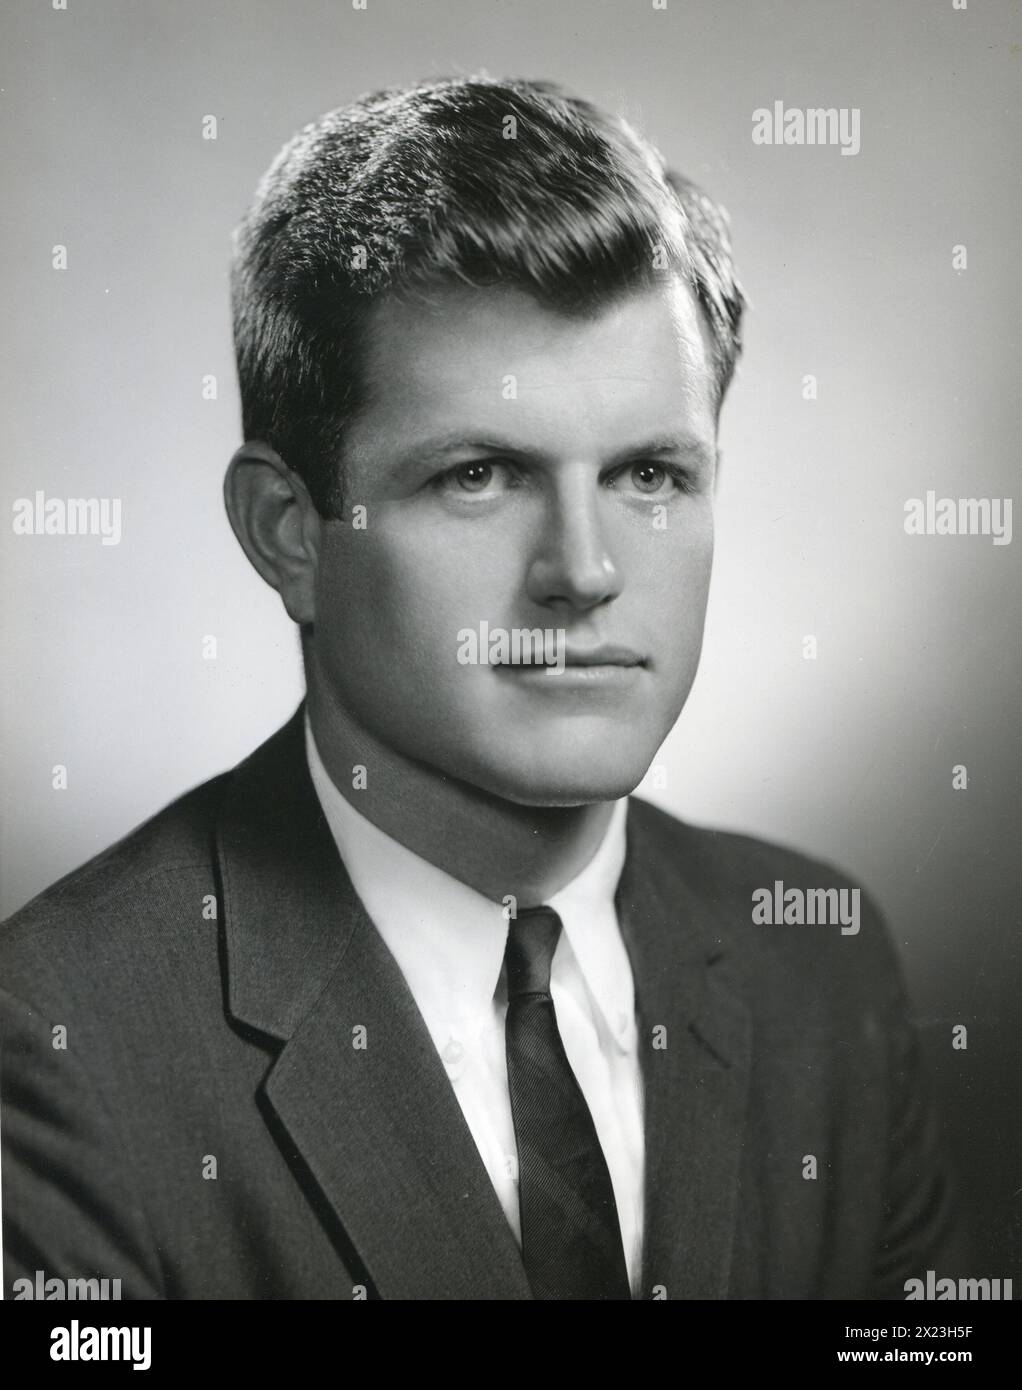 1960 - Edward Kennedy, the 29-year-old brother of John F. Kennedy. Stock Photo